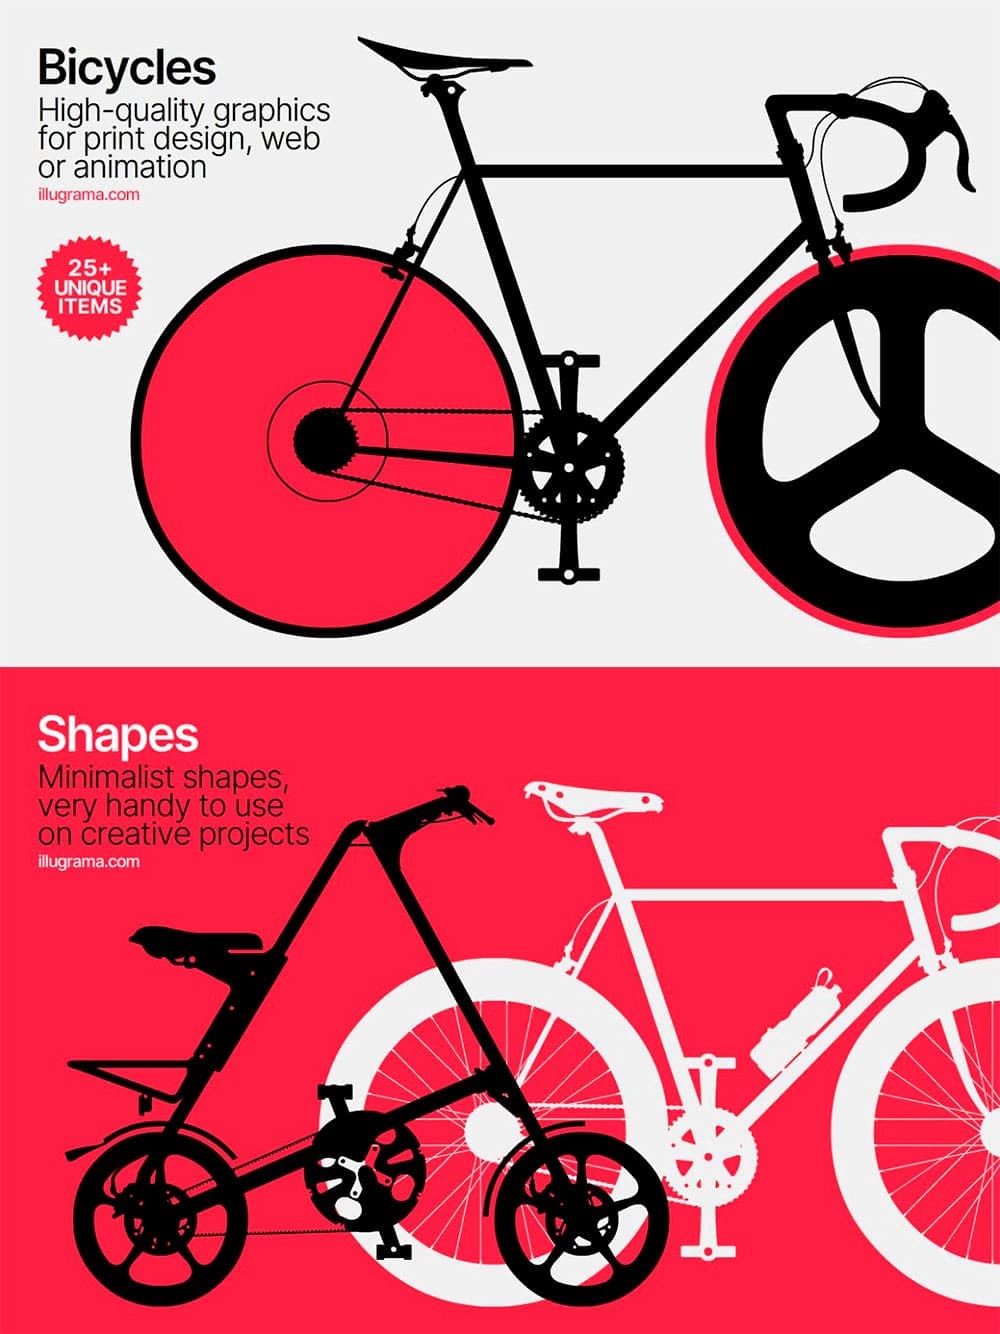 Bicycles modern graphics, picture for pinterest.